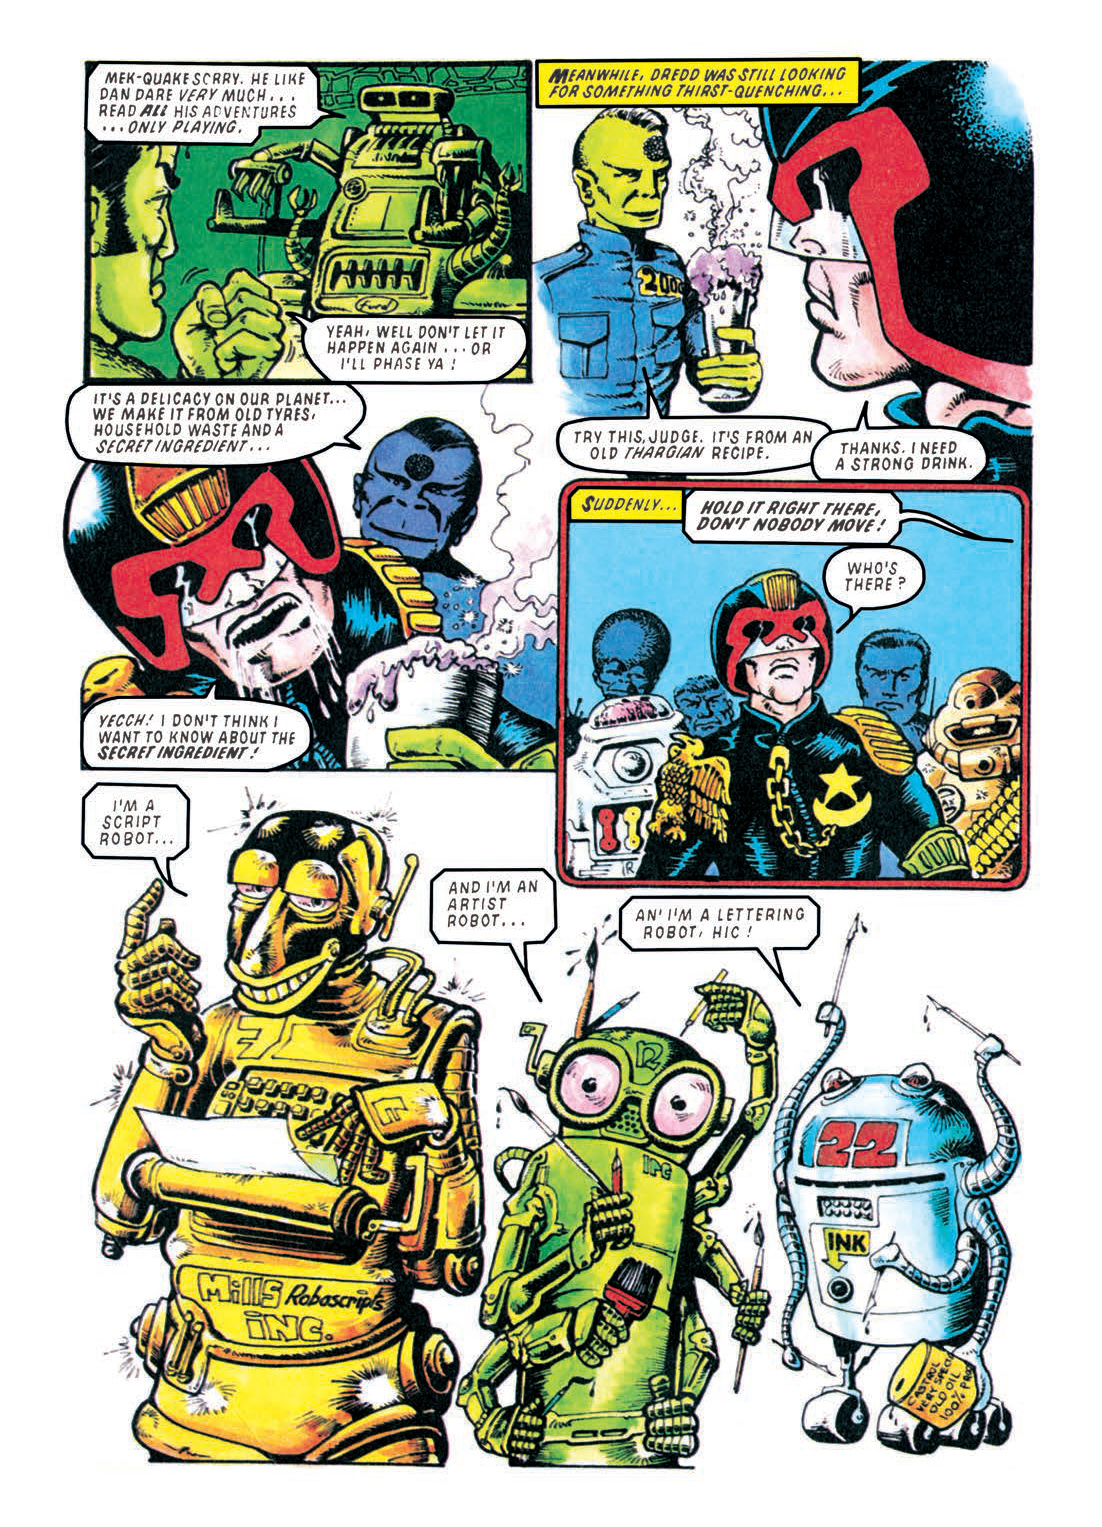 Read online Judge Dredd: The Restricted Files comic -  Issue # TPB 1 - 65